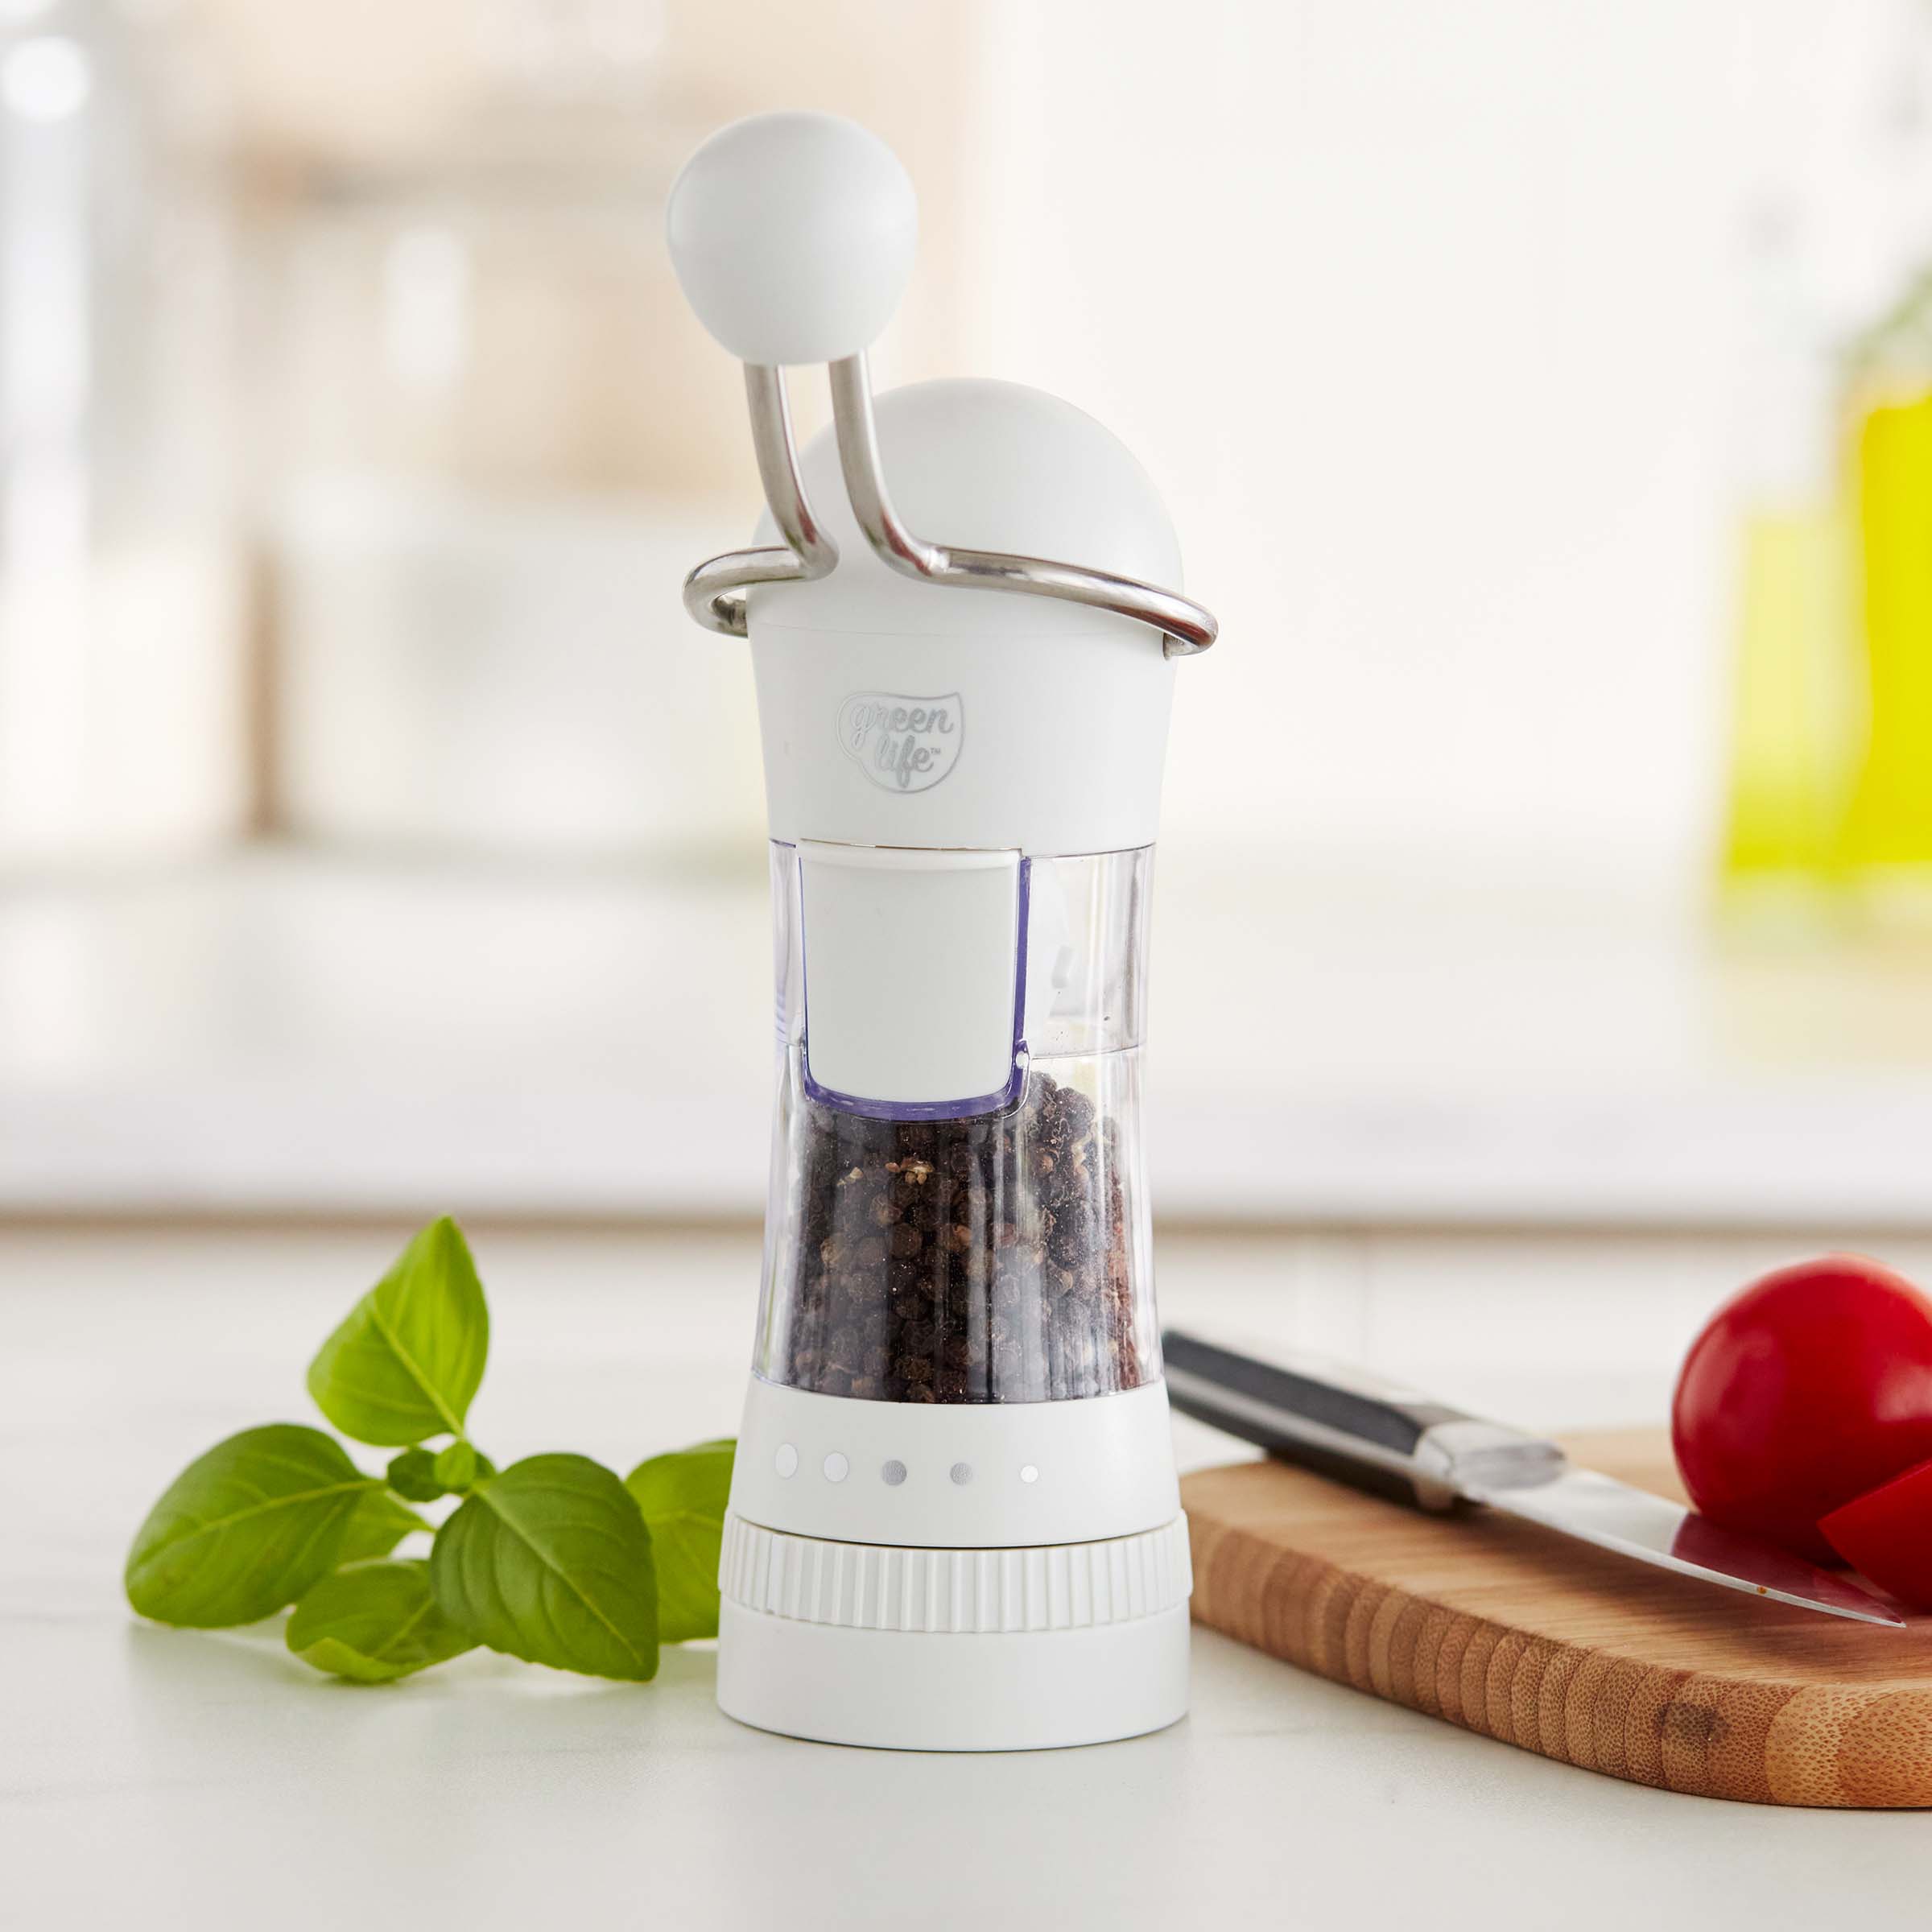 GreenLife Salt and Pepper Grinder, Mess-Free Ratchet Mill, Adjustable Coarseness and Easily Refillable, White 1/3 Cup Capacity